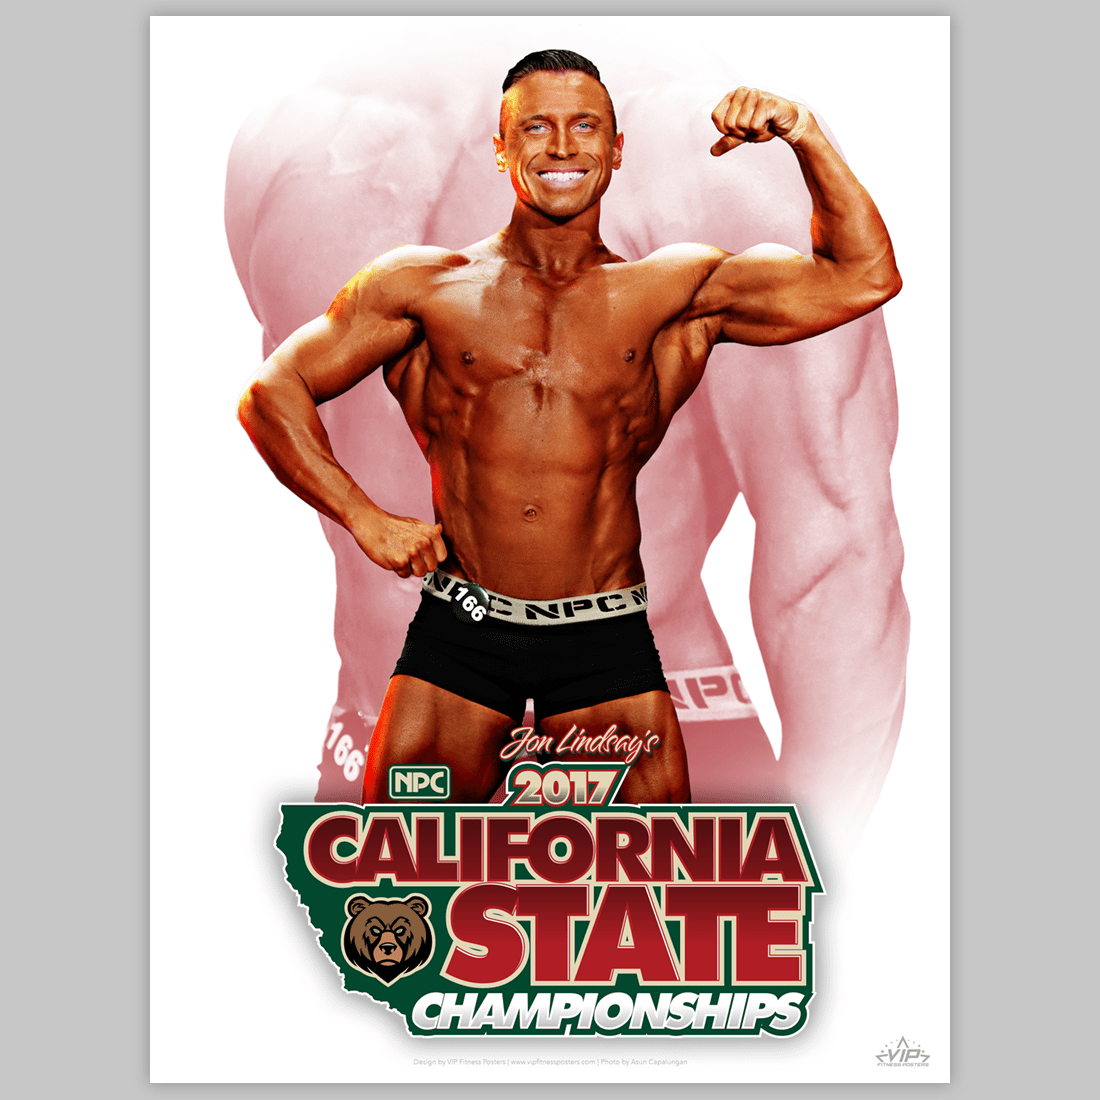 VIP Fitness posters for NPC and IFBB fitness competitors